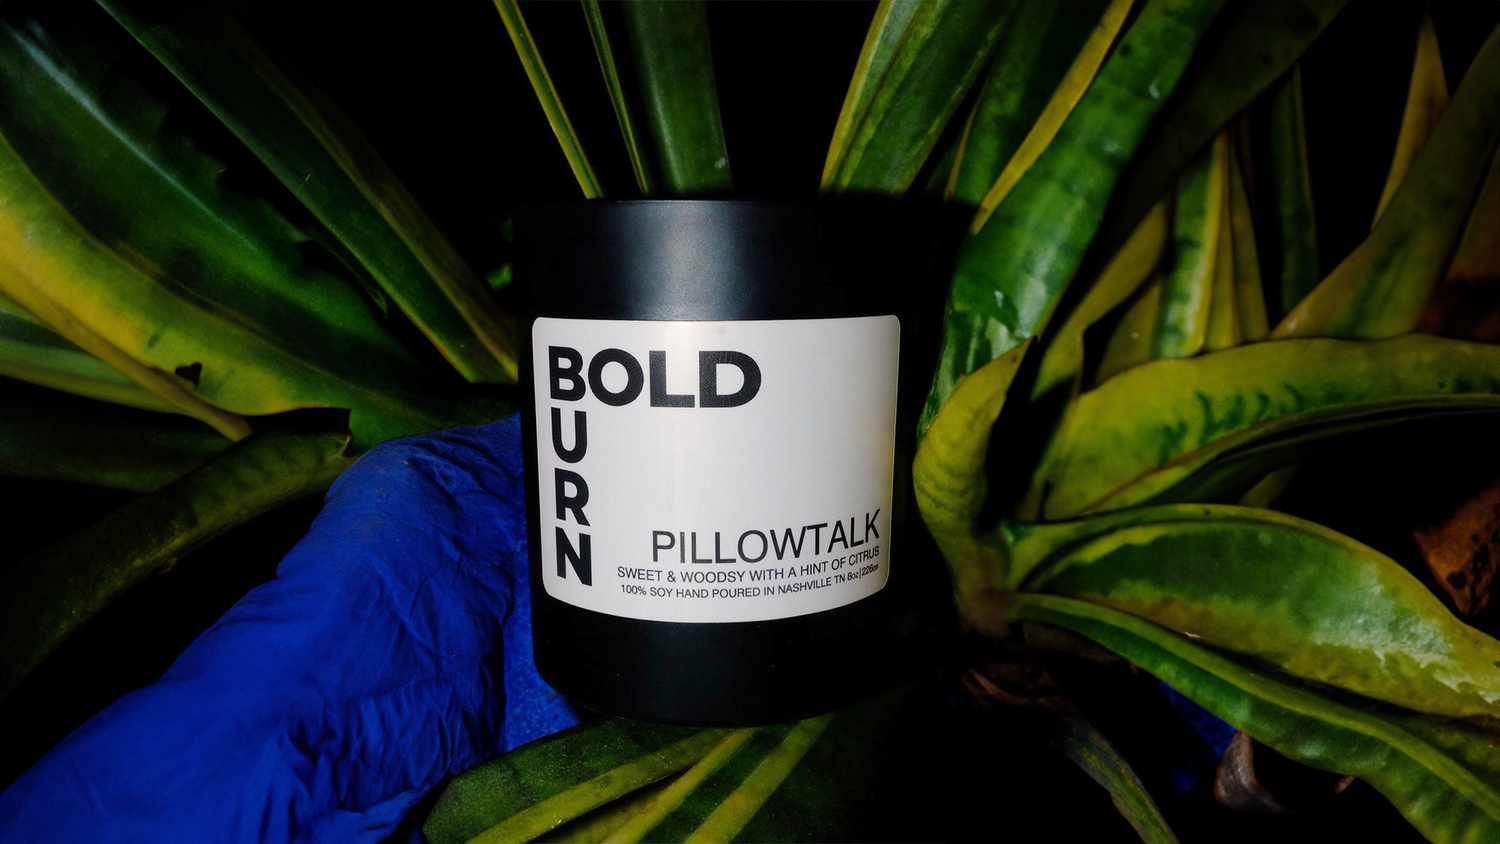 Bold Burn two-wick scented candle Pillowtalk resting near foliage 